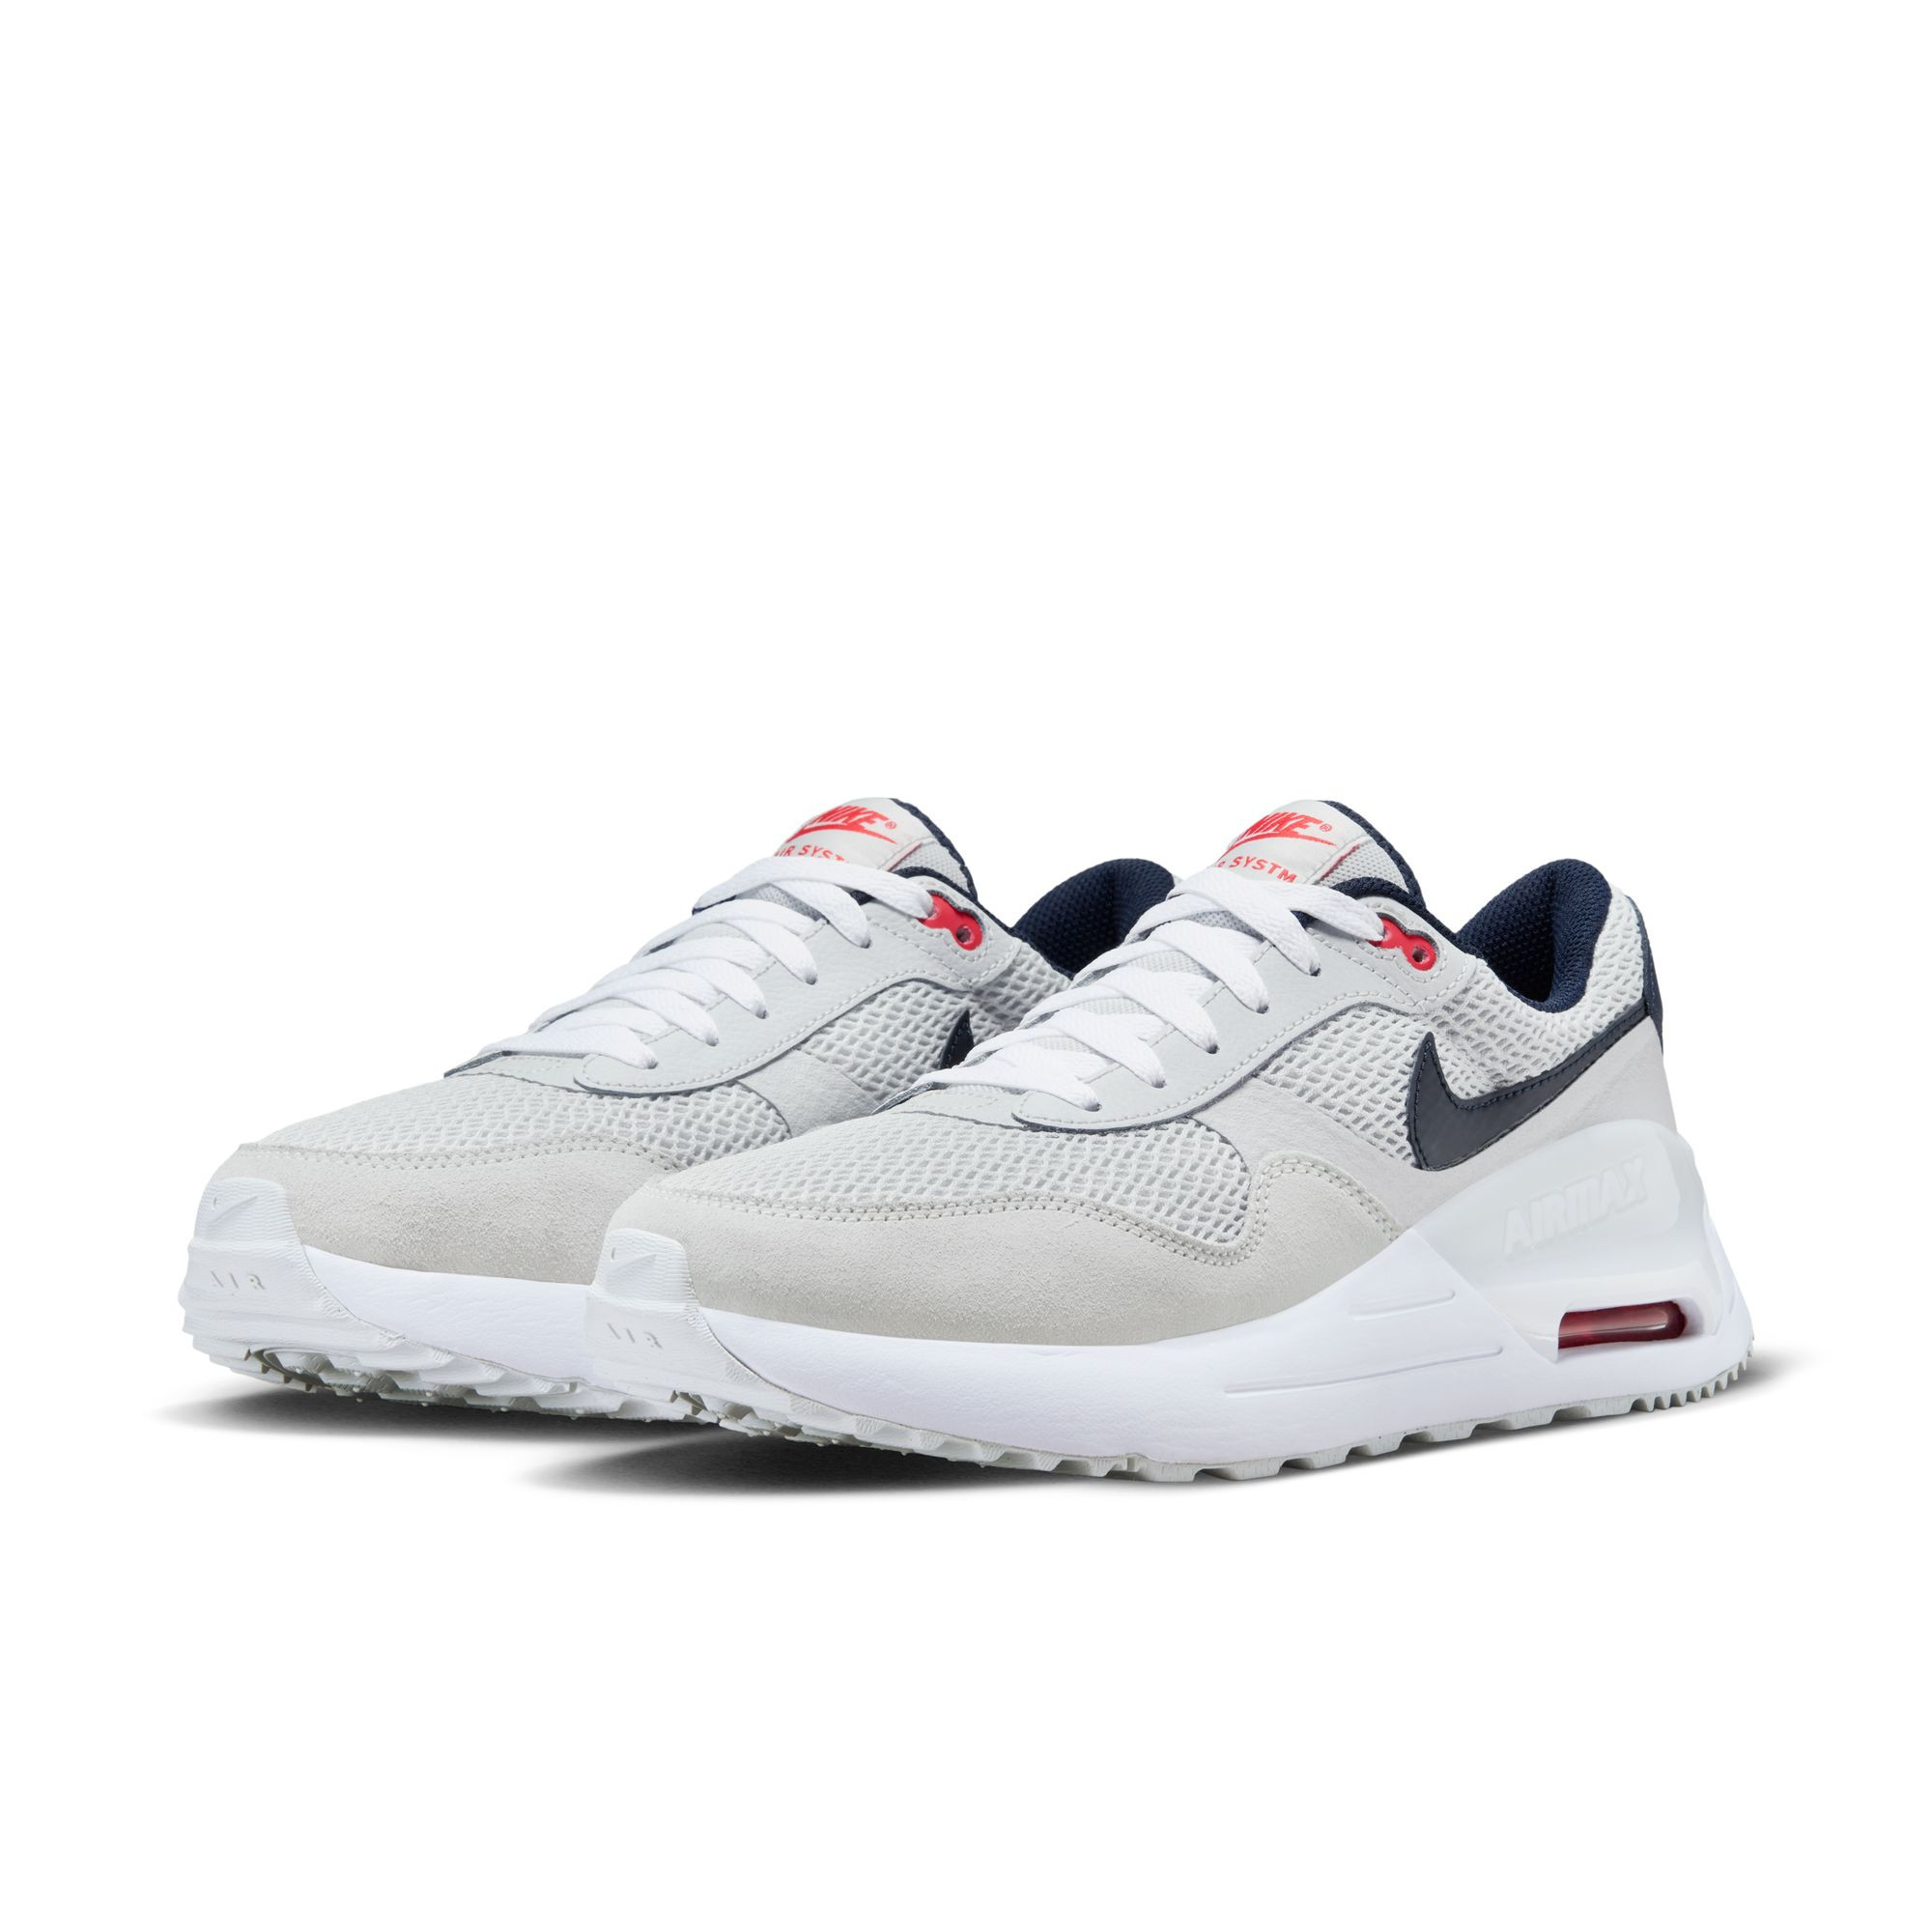 Nike Air Max SYSTM Shoes - Photon Dust/Obsidian-White-Track Red - DM9537-013